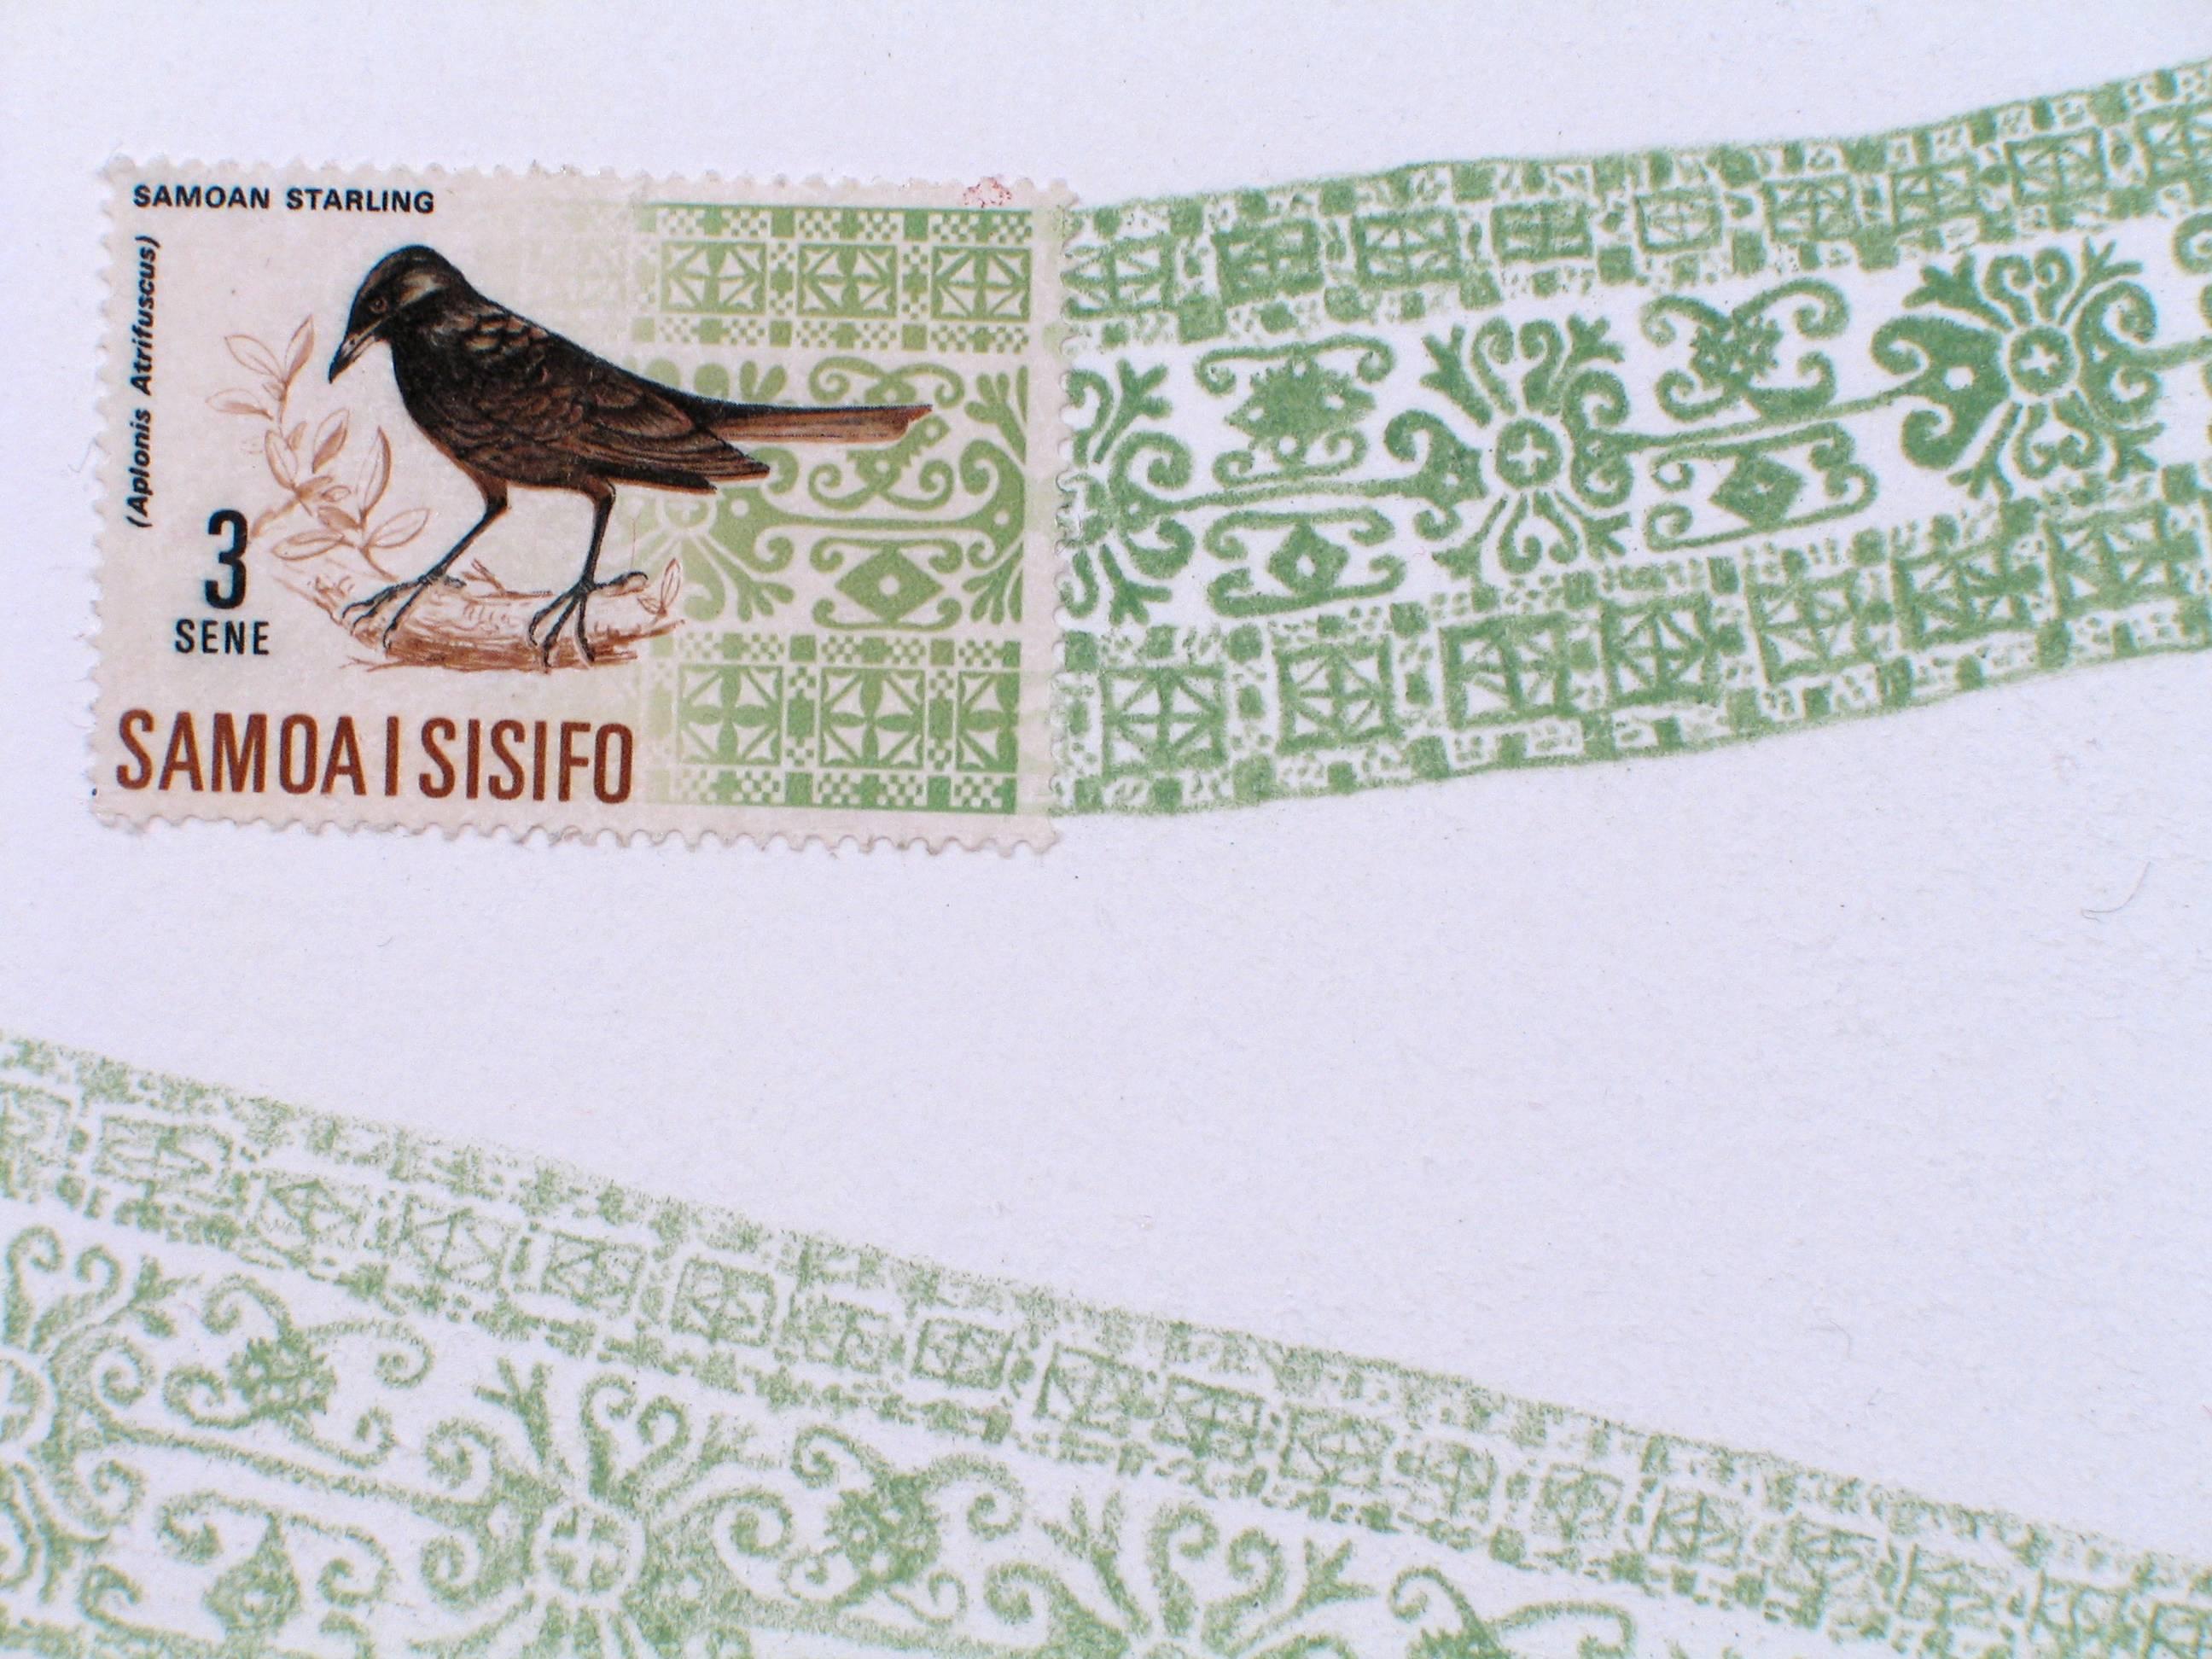 Samoa, Green Flight Pattern (Pastel Green Colored Pencil Drawing & Bird Stamp) - Art by Andrea Moreau